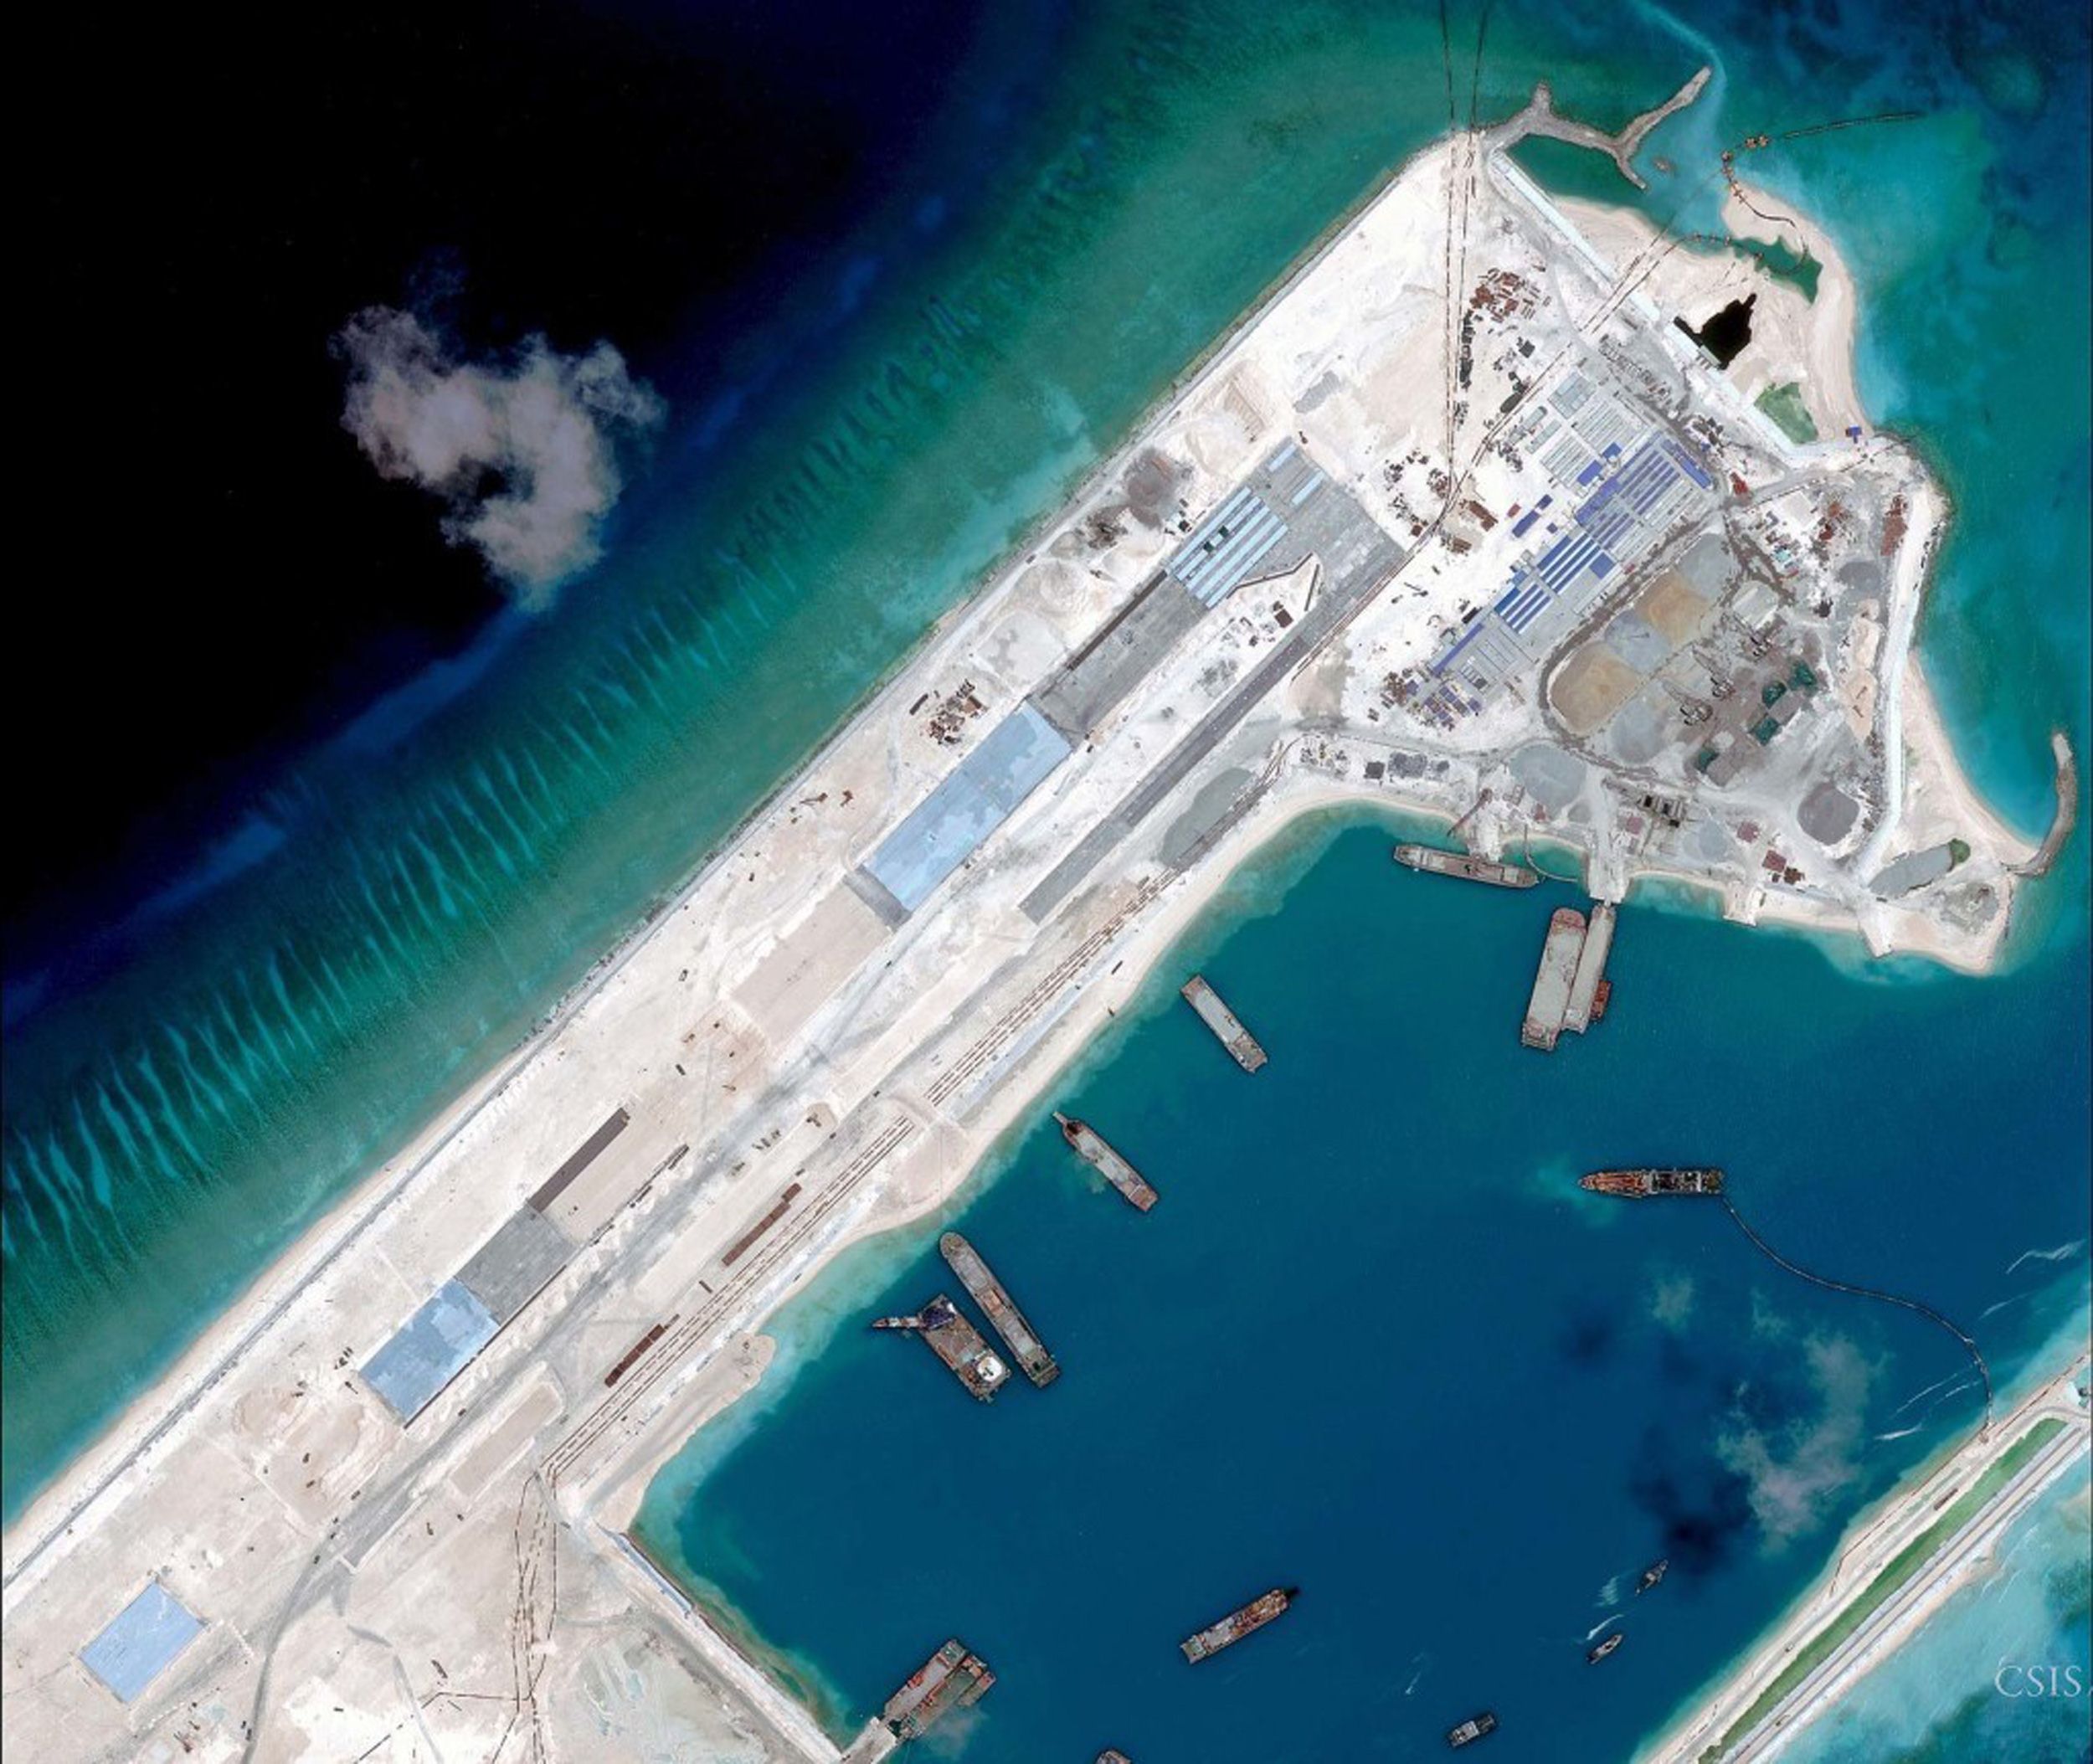 A satellite image released last month of what appears to be an airstrip Beijing is constructing in the disputed Spratly Islands in the South China Sea. Photo: AFP